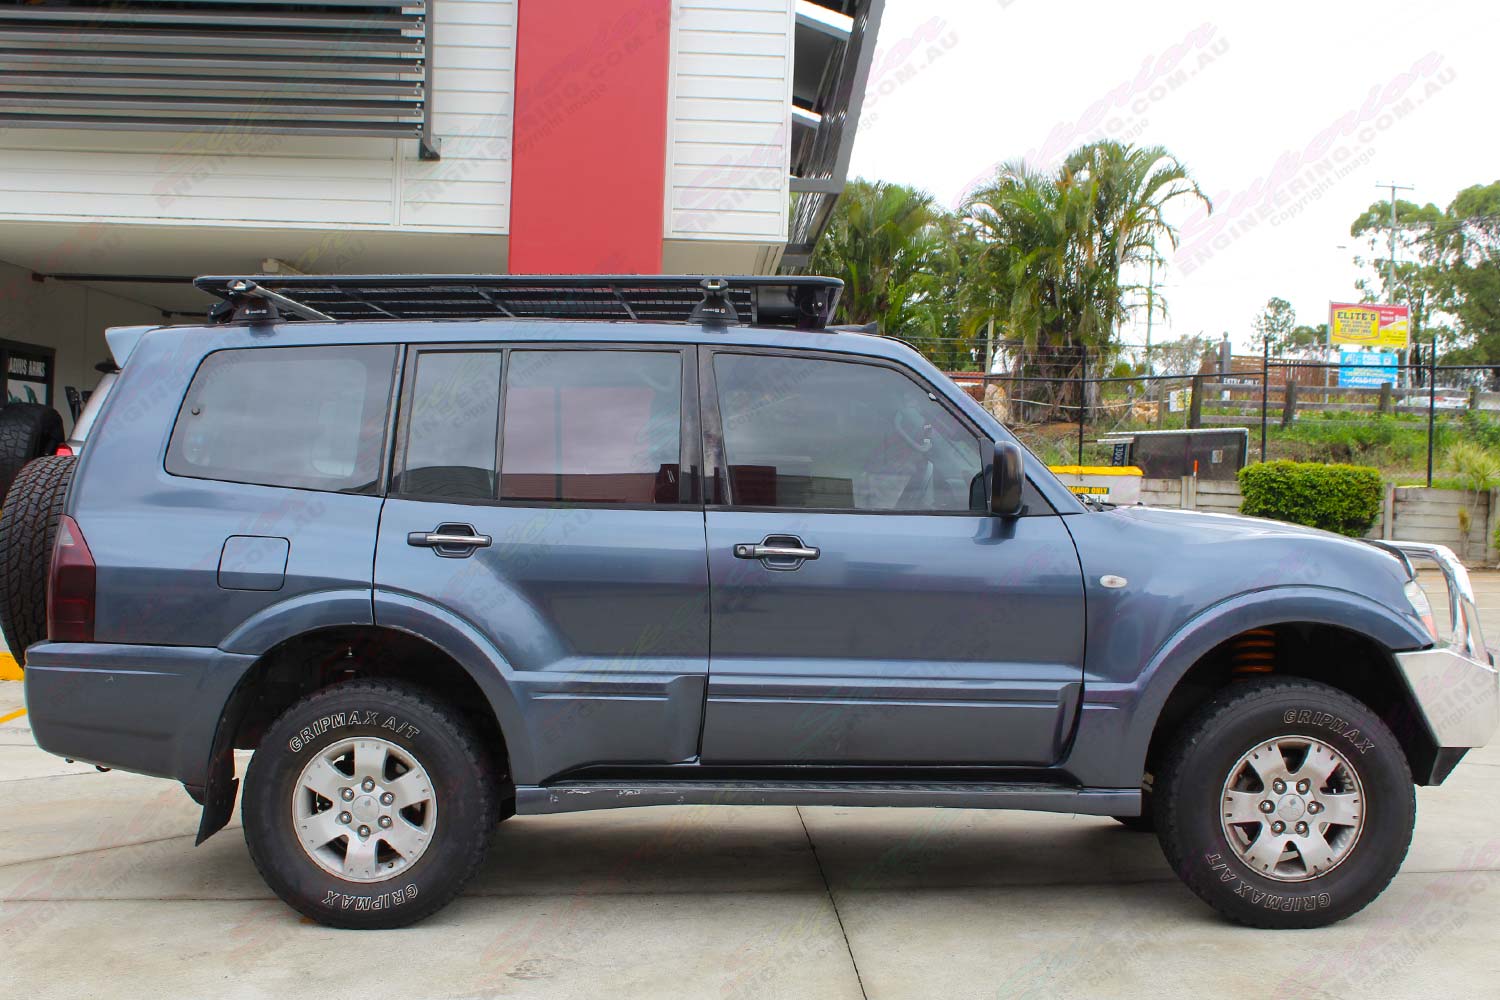 Right side view of a dark grey NP Mitsubishi Pajero wagon fitted out with a 40mm Ironman lift kit